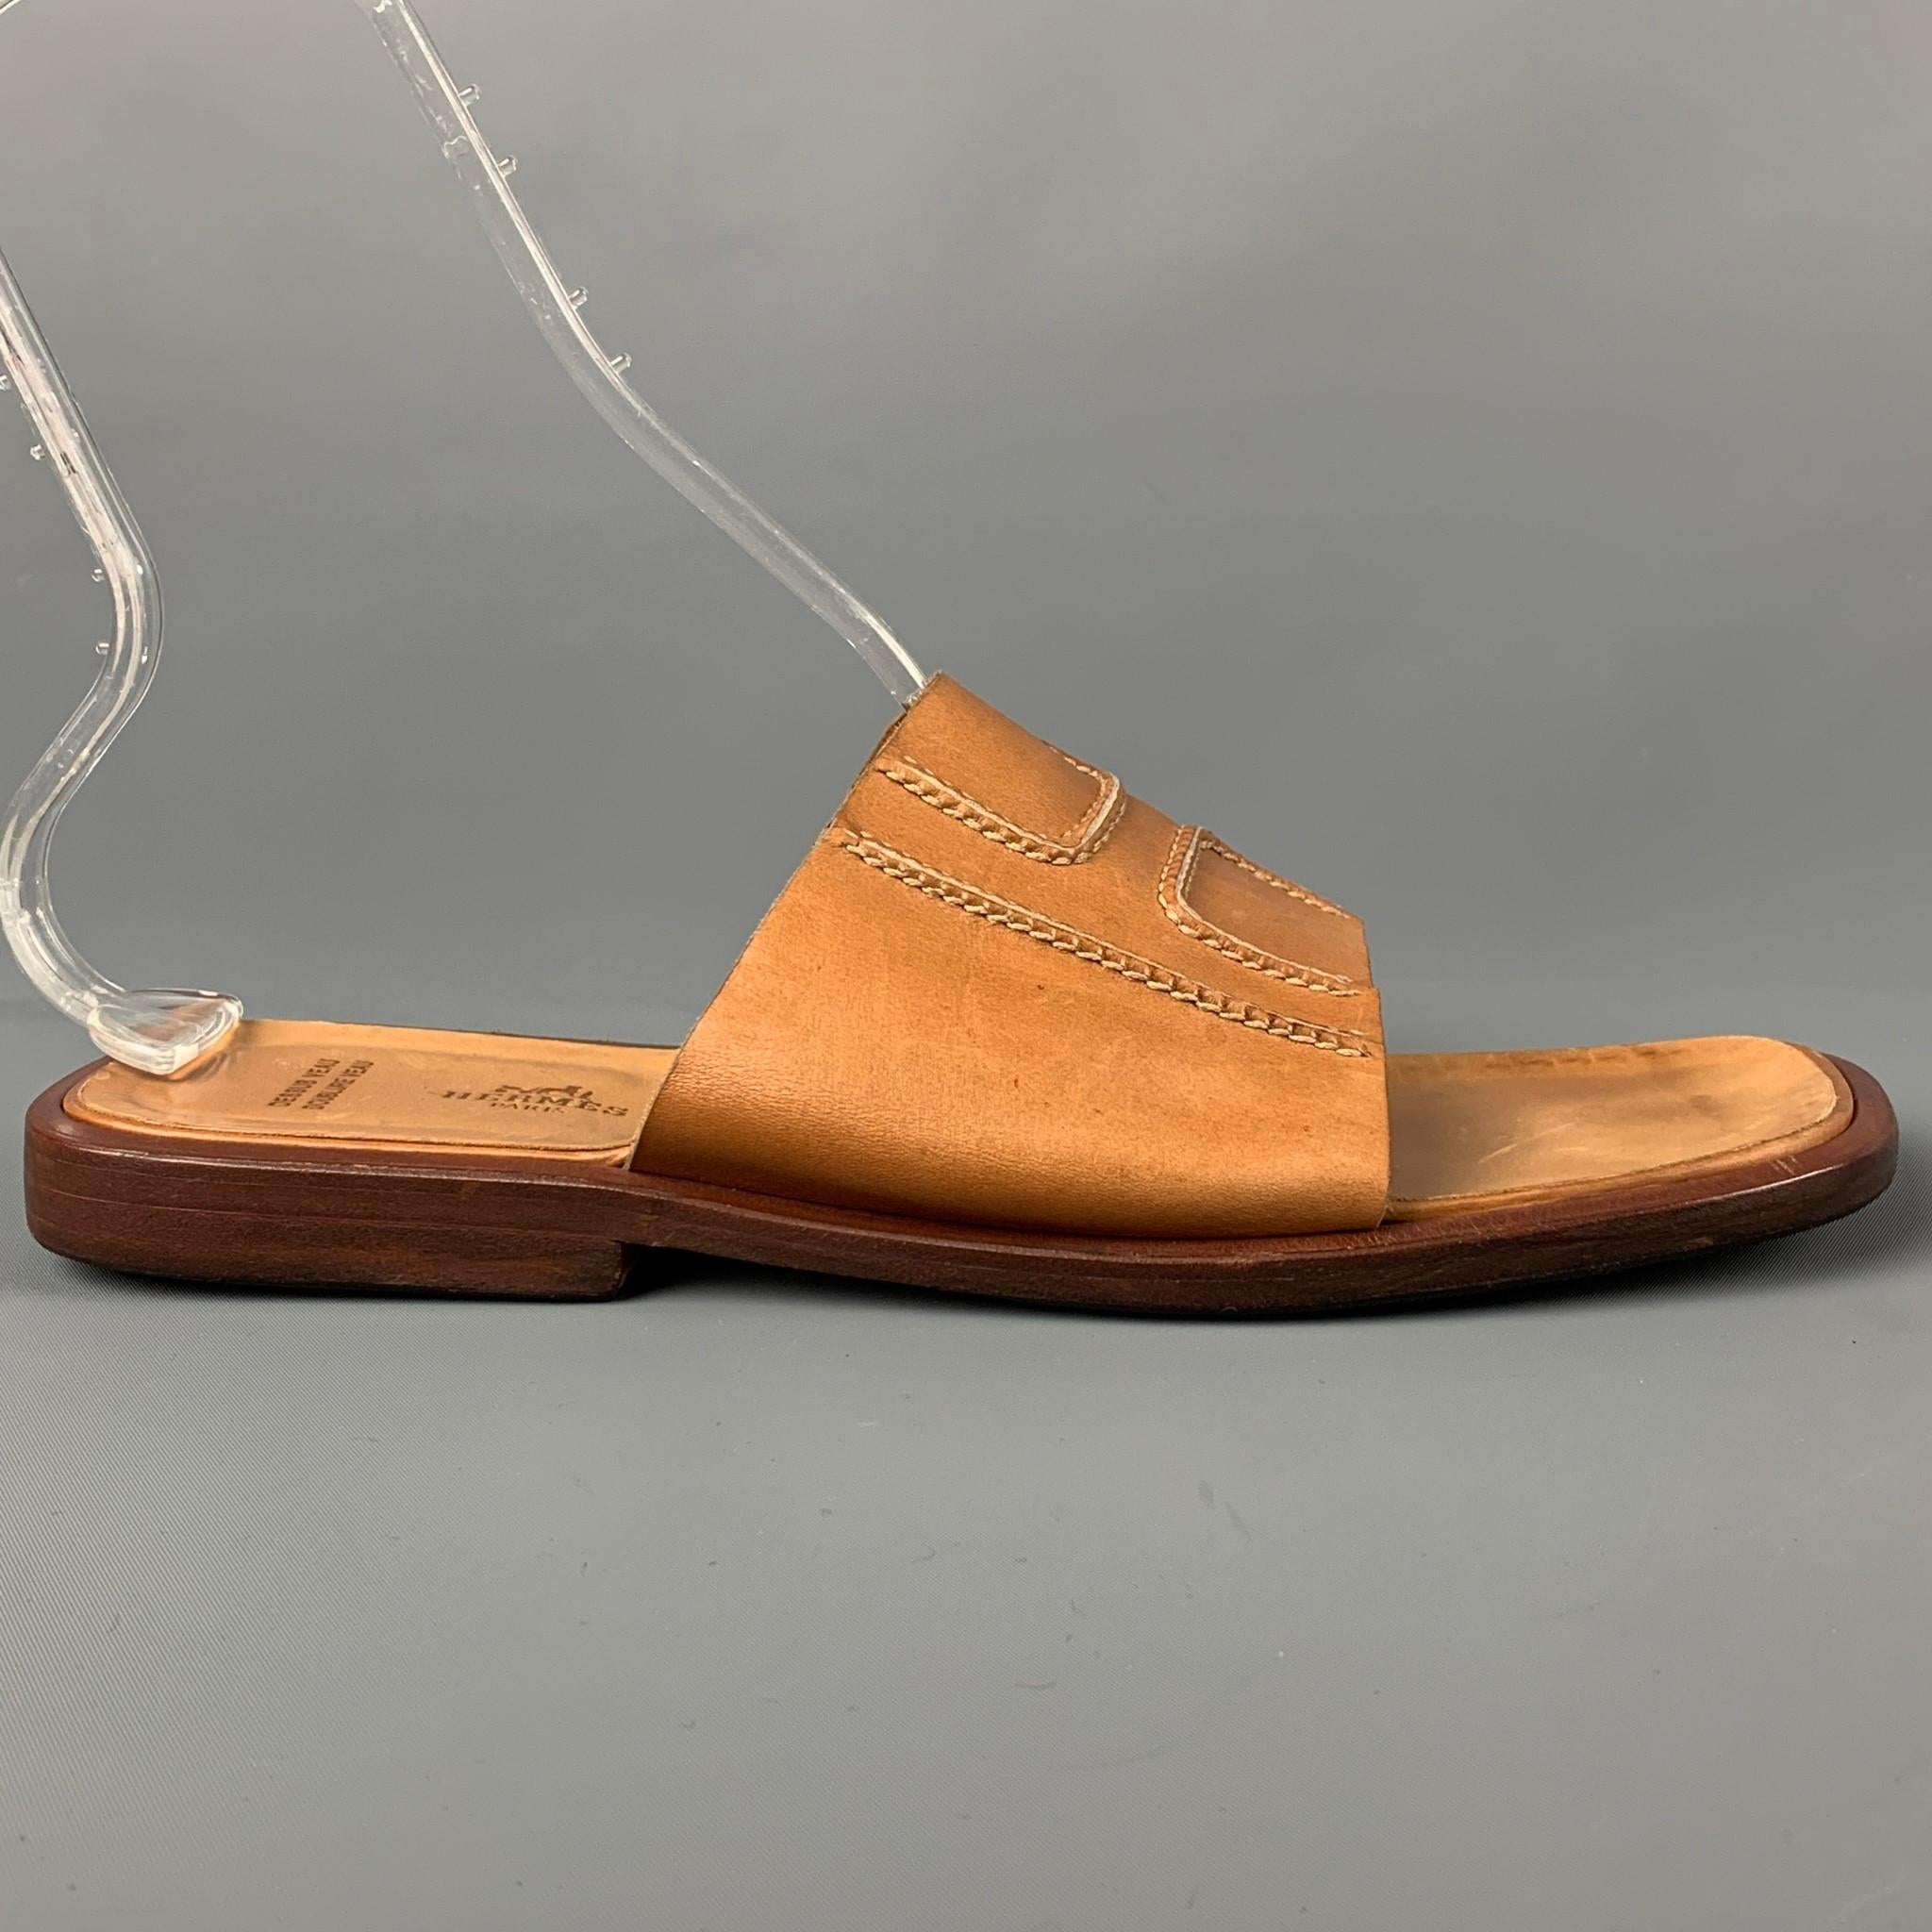 HERMES sandals comes in a tan leather featuring a 'H' stitched design and a slip on style. Made in Italy. 

Good Pre-Owned Condition.
Marked: 45

Outsole: 11.5 in. x 4.5 in. 